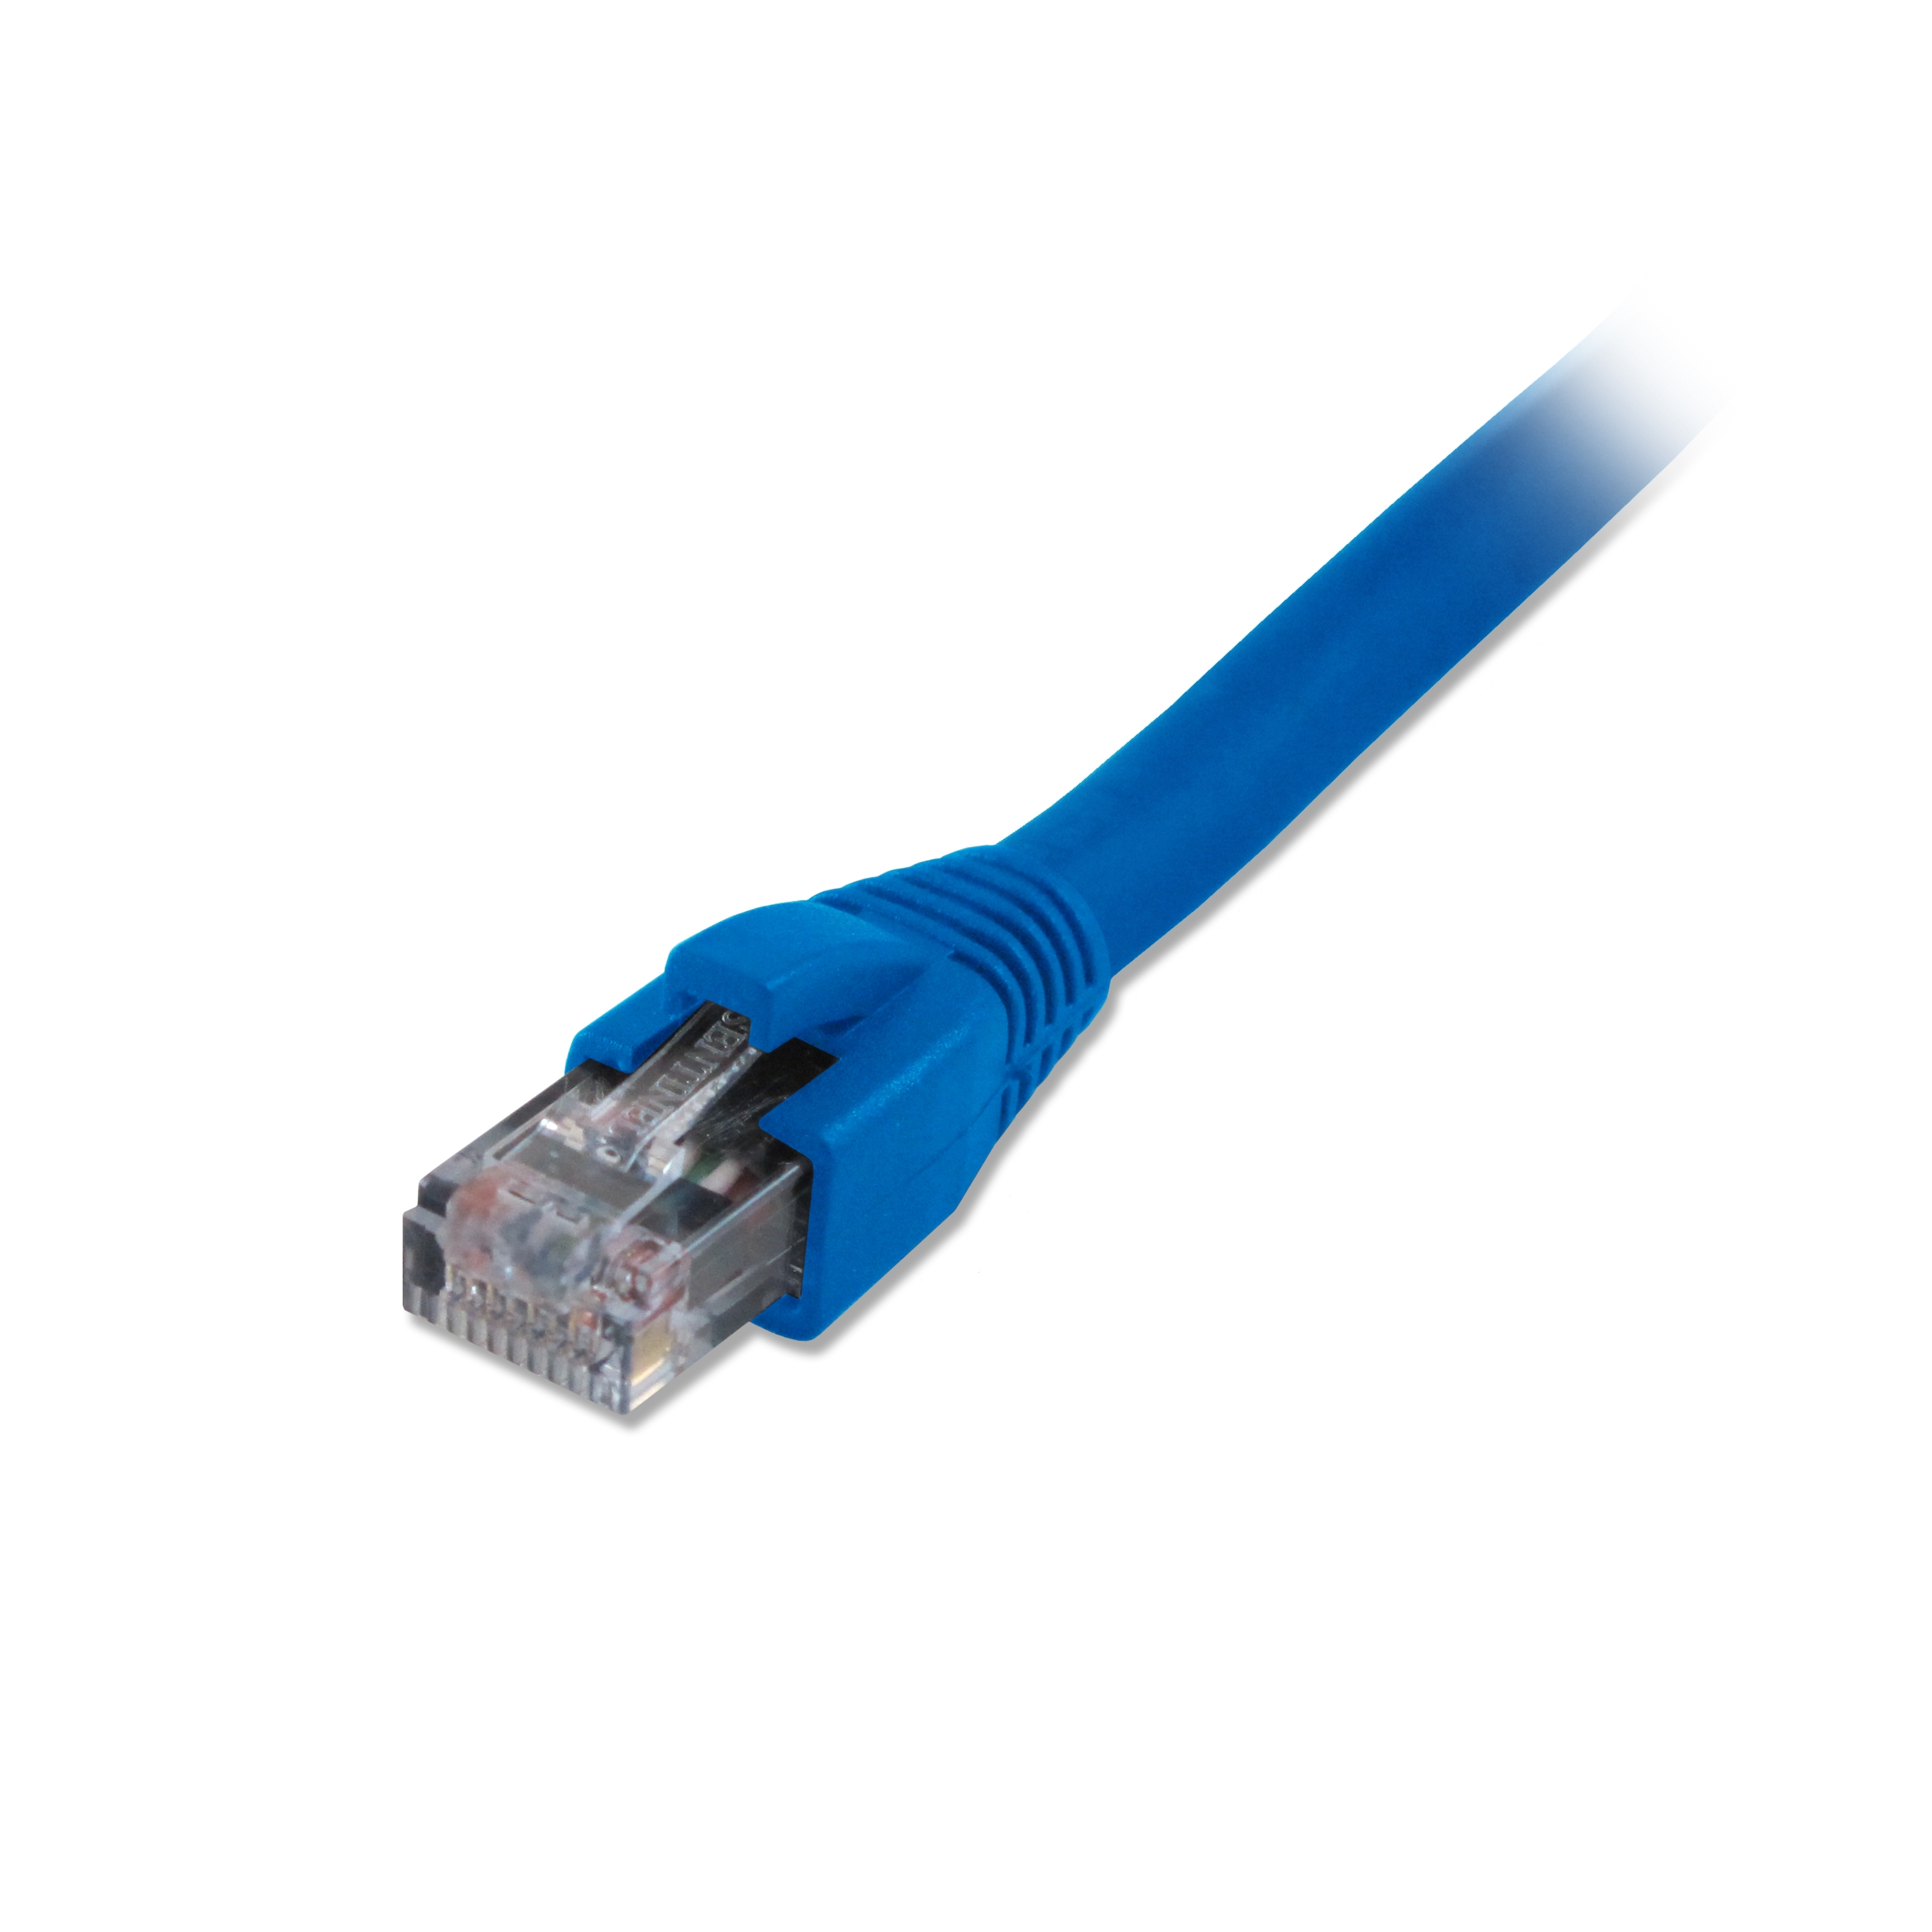 Comprehensive CAT5-350-1BLU Cat5e 350 Mhz Snagless Patch Cable 1ft Blue